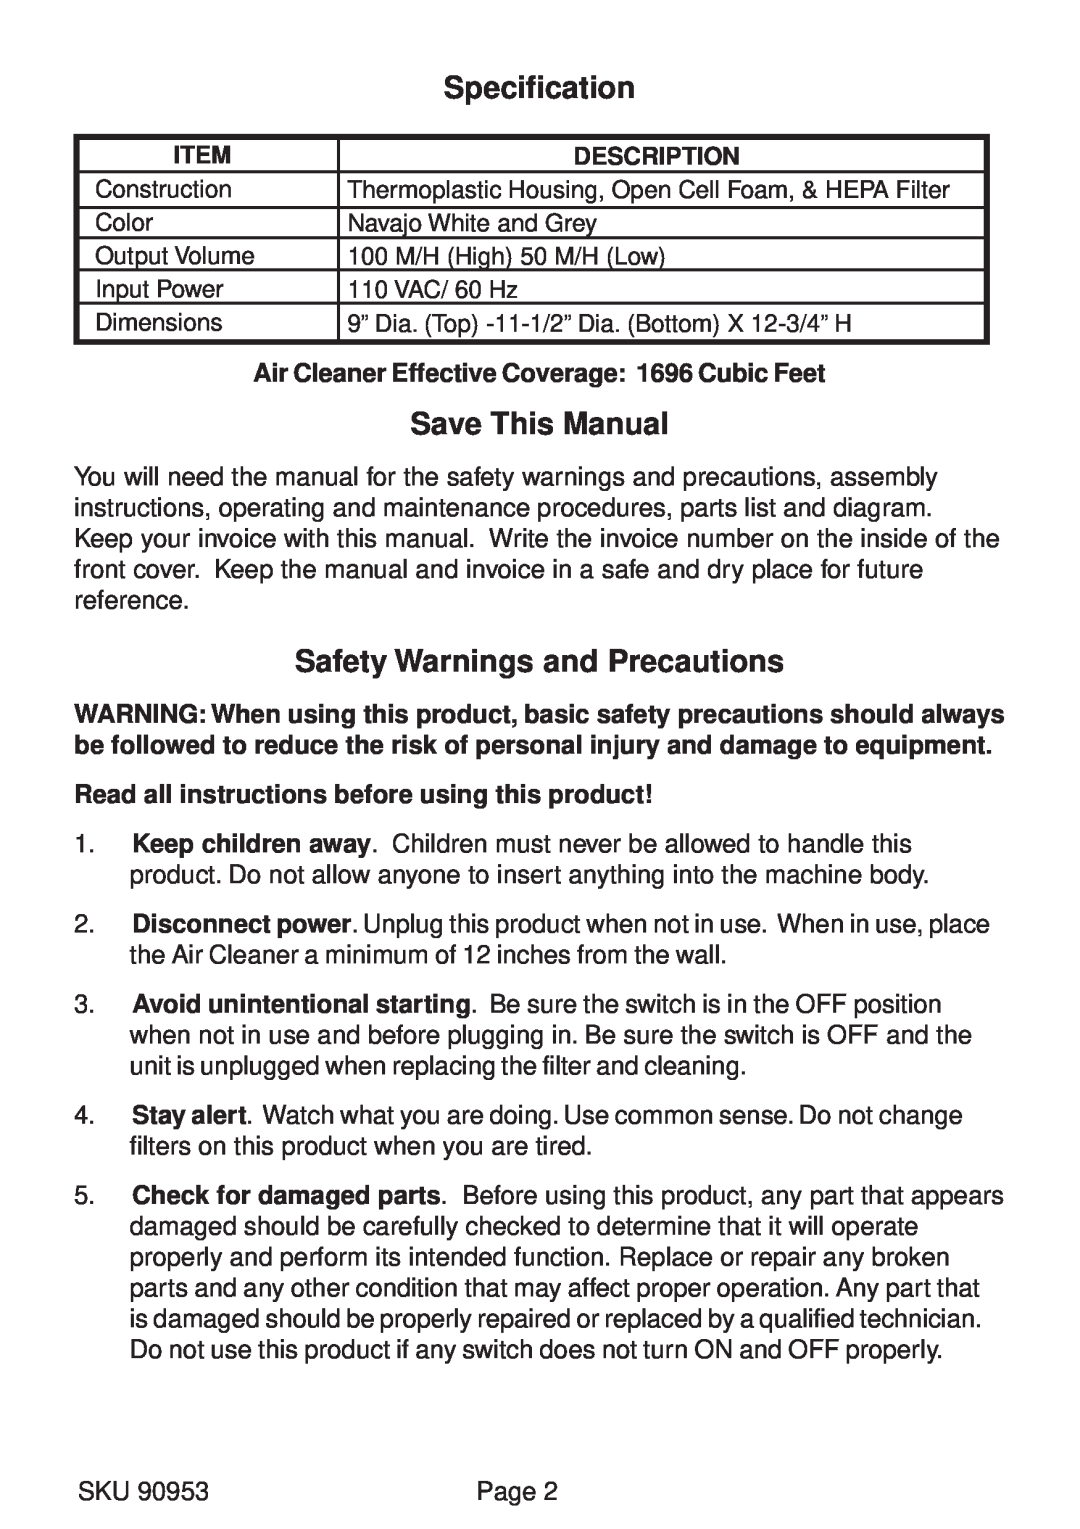 Harbor Freight Tools 90953 manual Specification, Save This Manual, Safety Warnings and Precautions, Description 